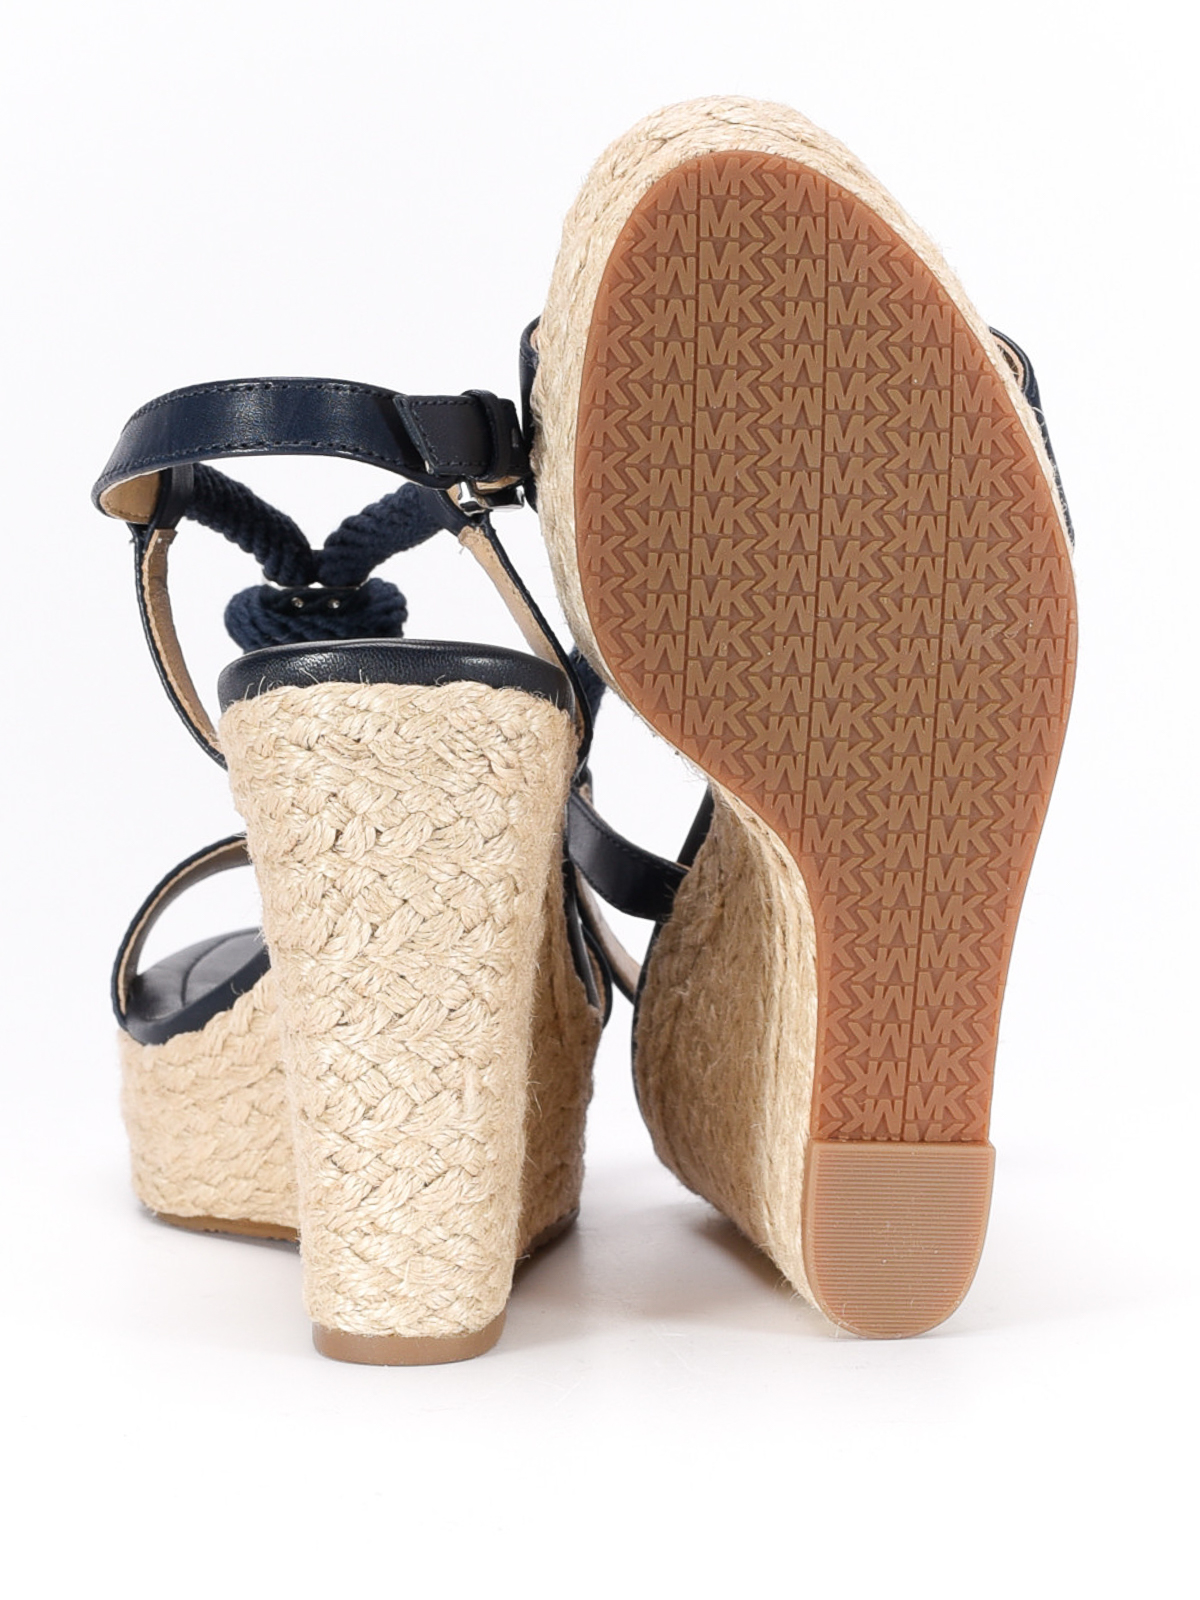 Sandals Michael Kors - Holly knot detail wedges - 40S6HOHA2L 